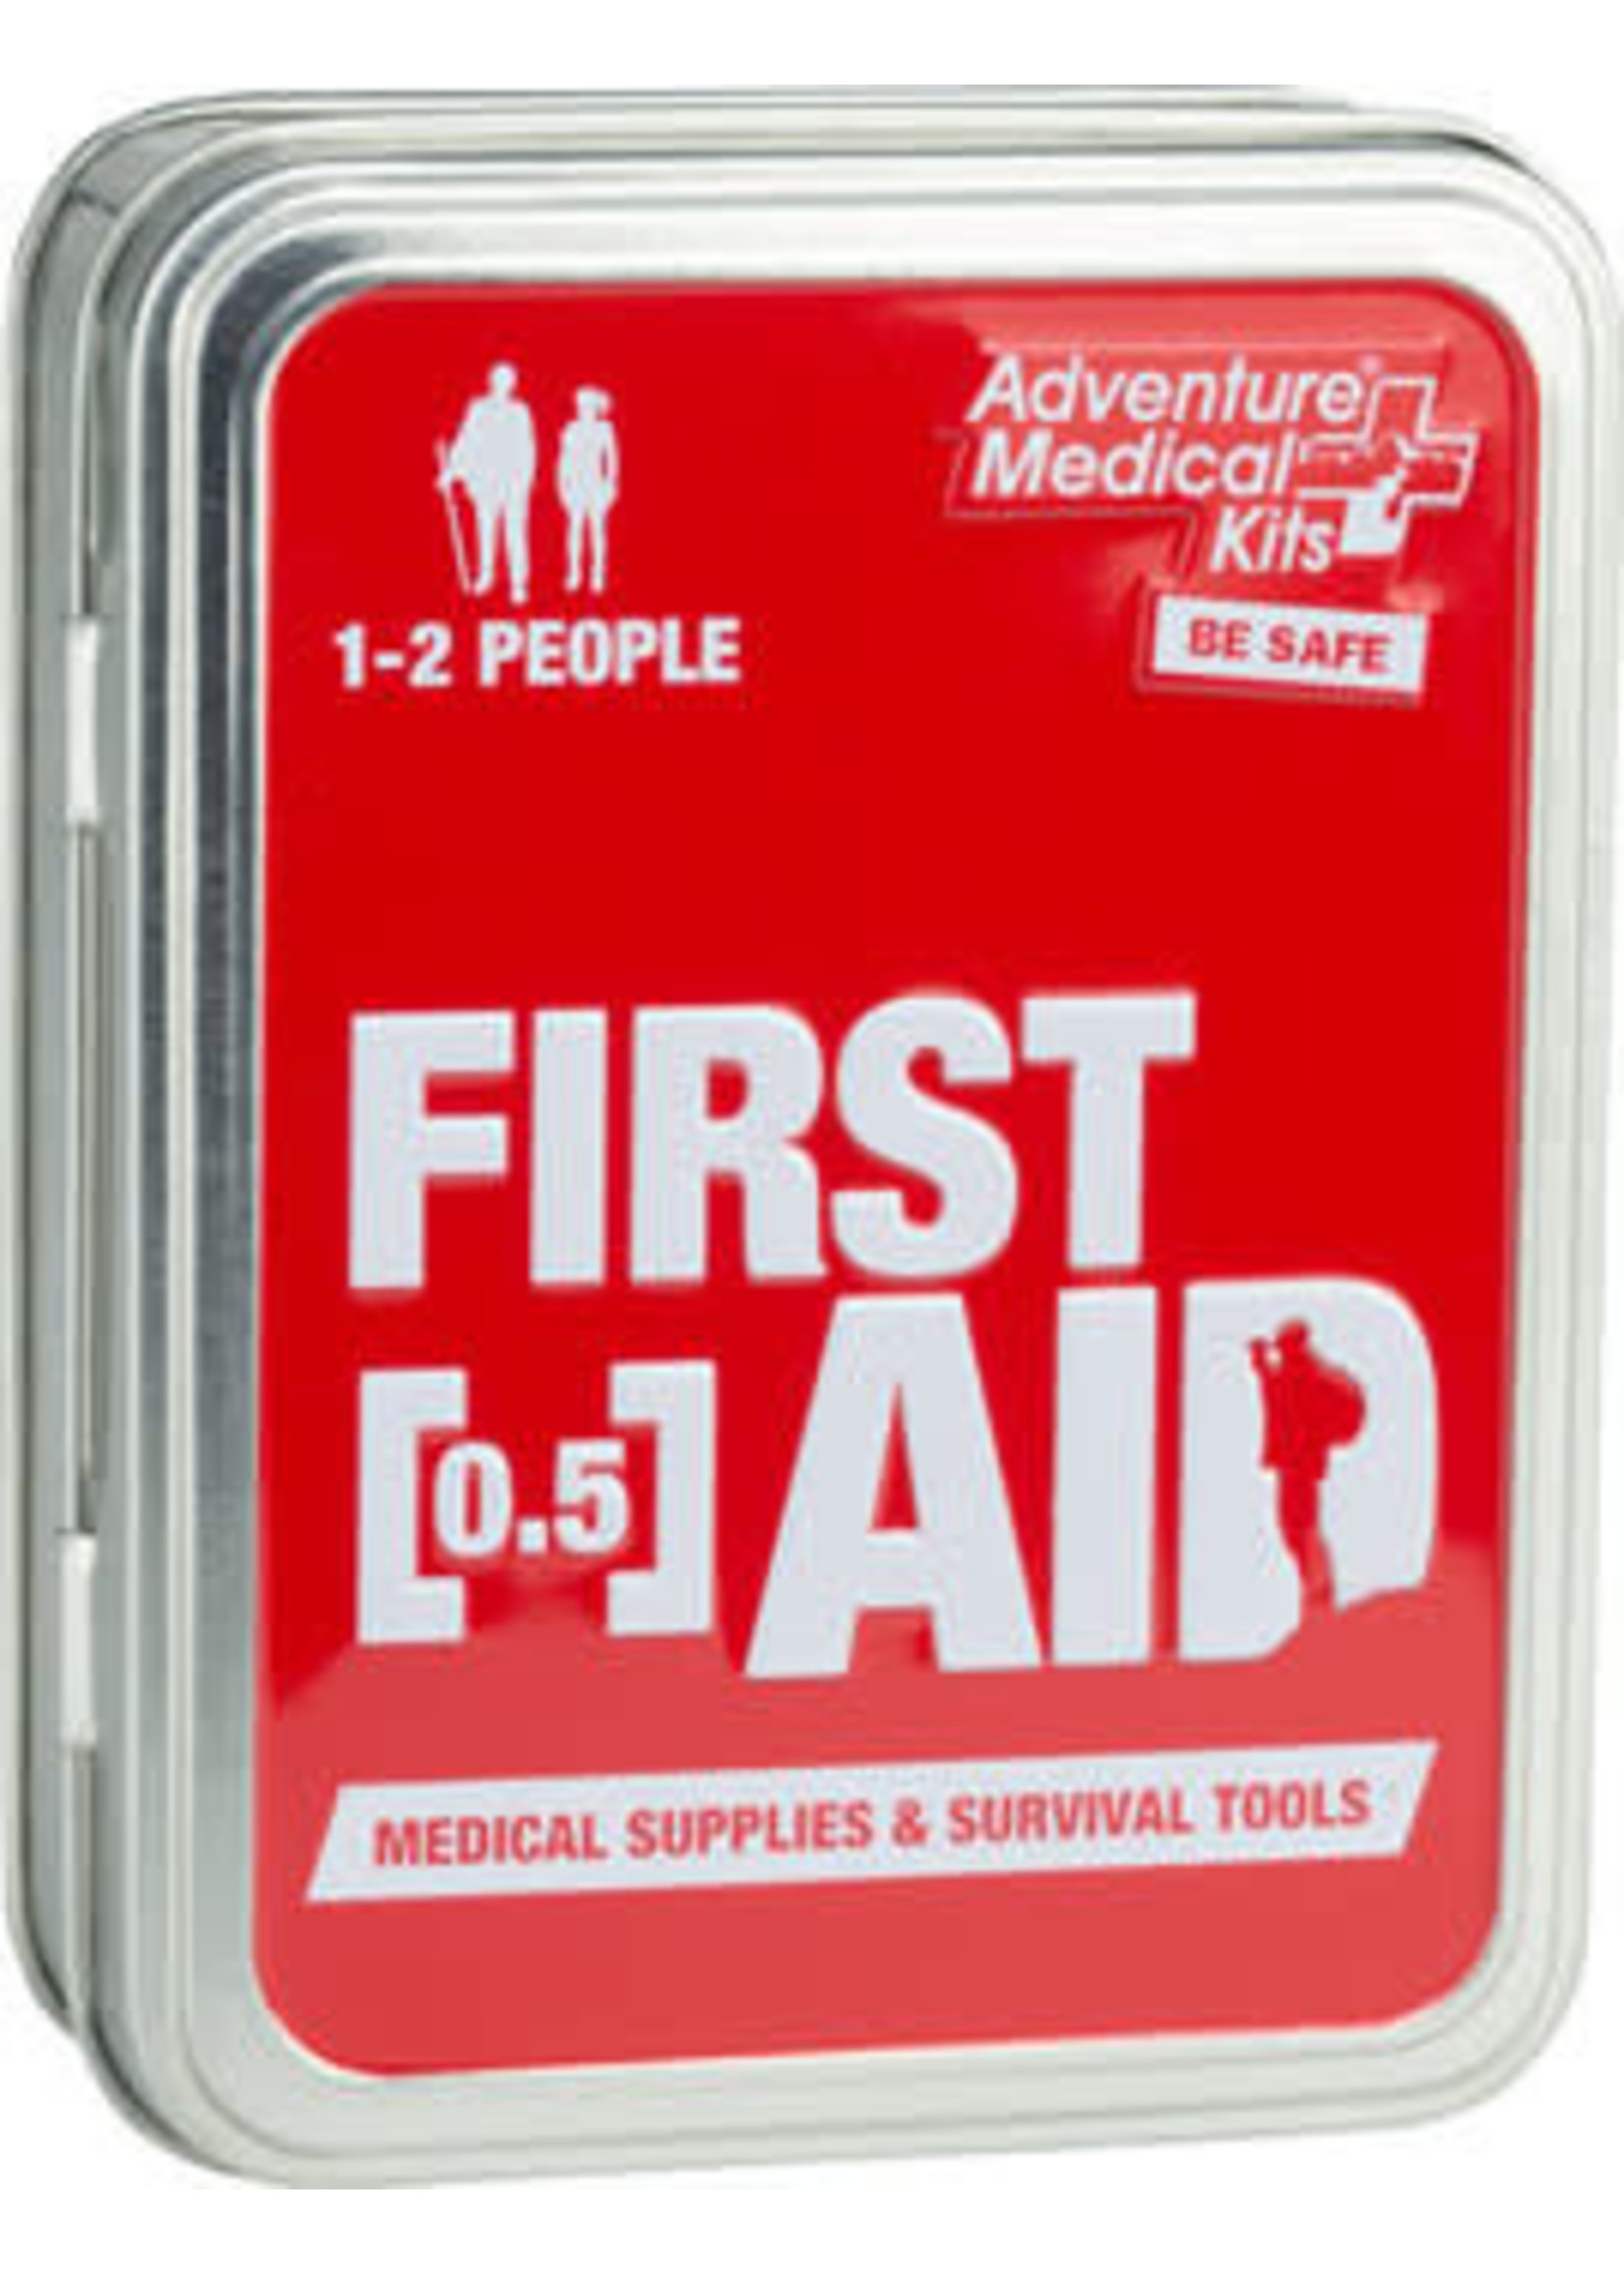 Adventure Medical Kits Adventure Medical Kits Adventure First Aid 0.5